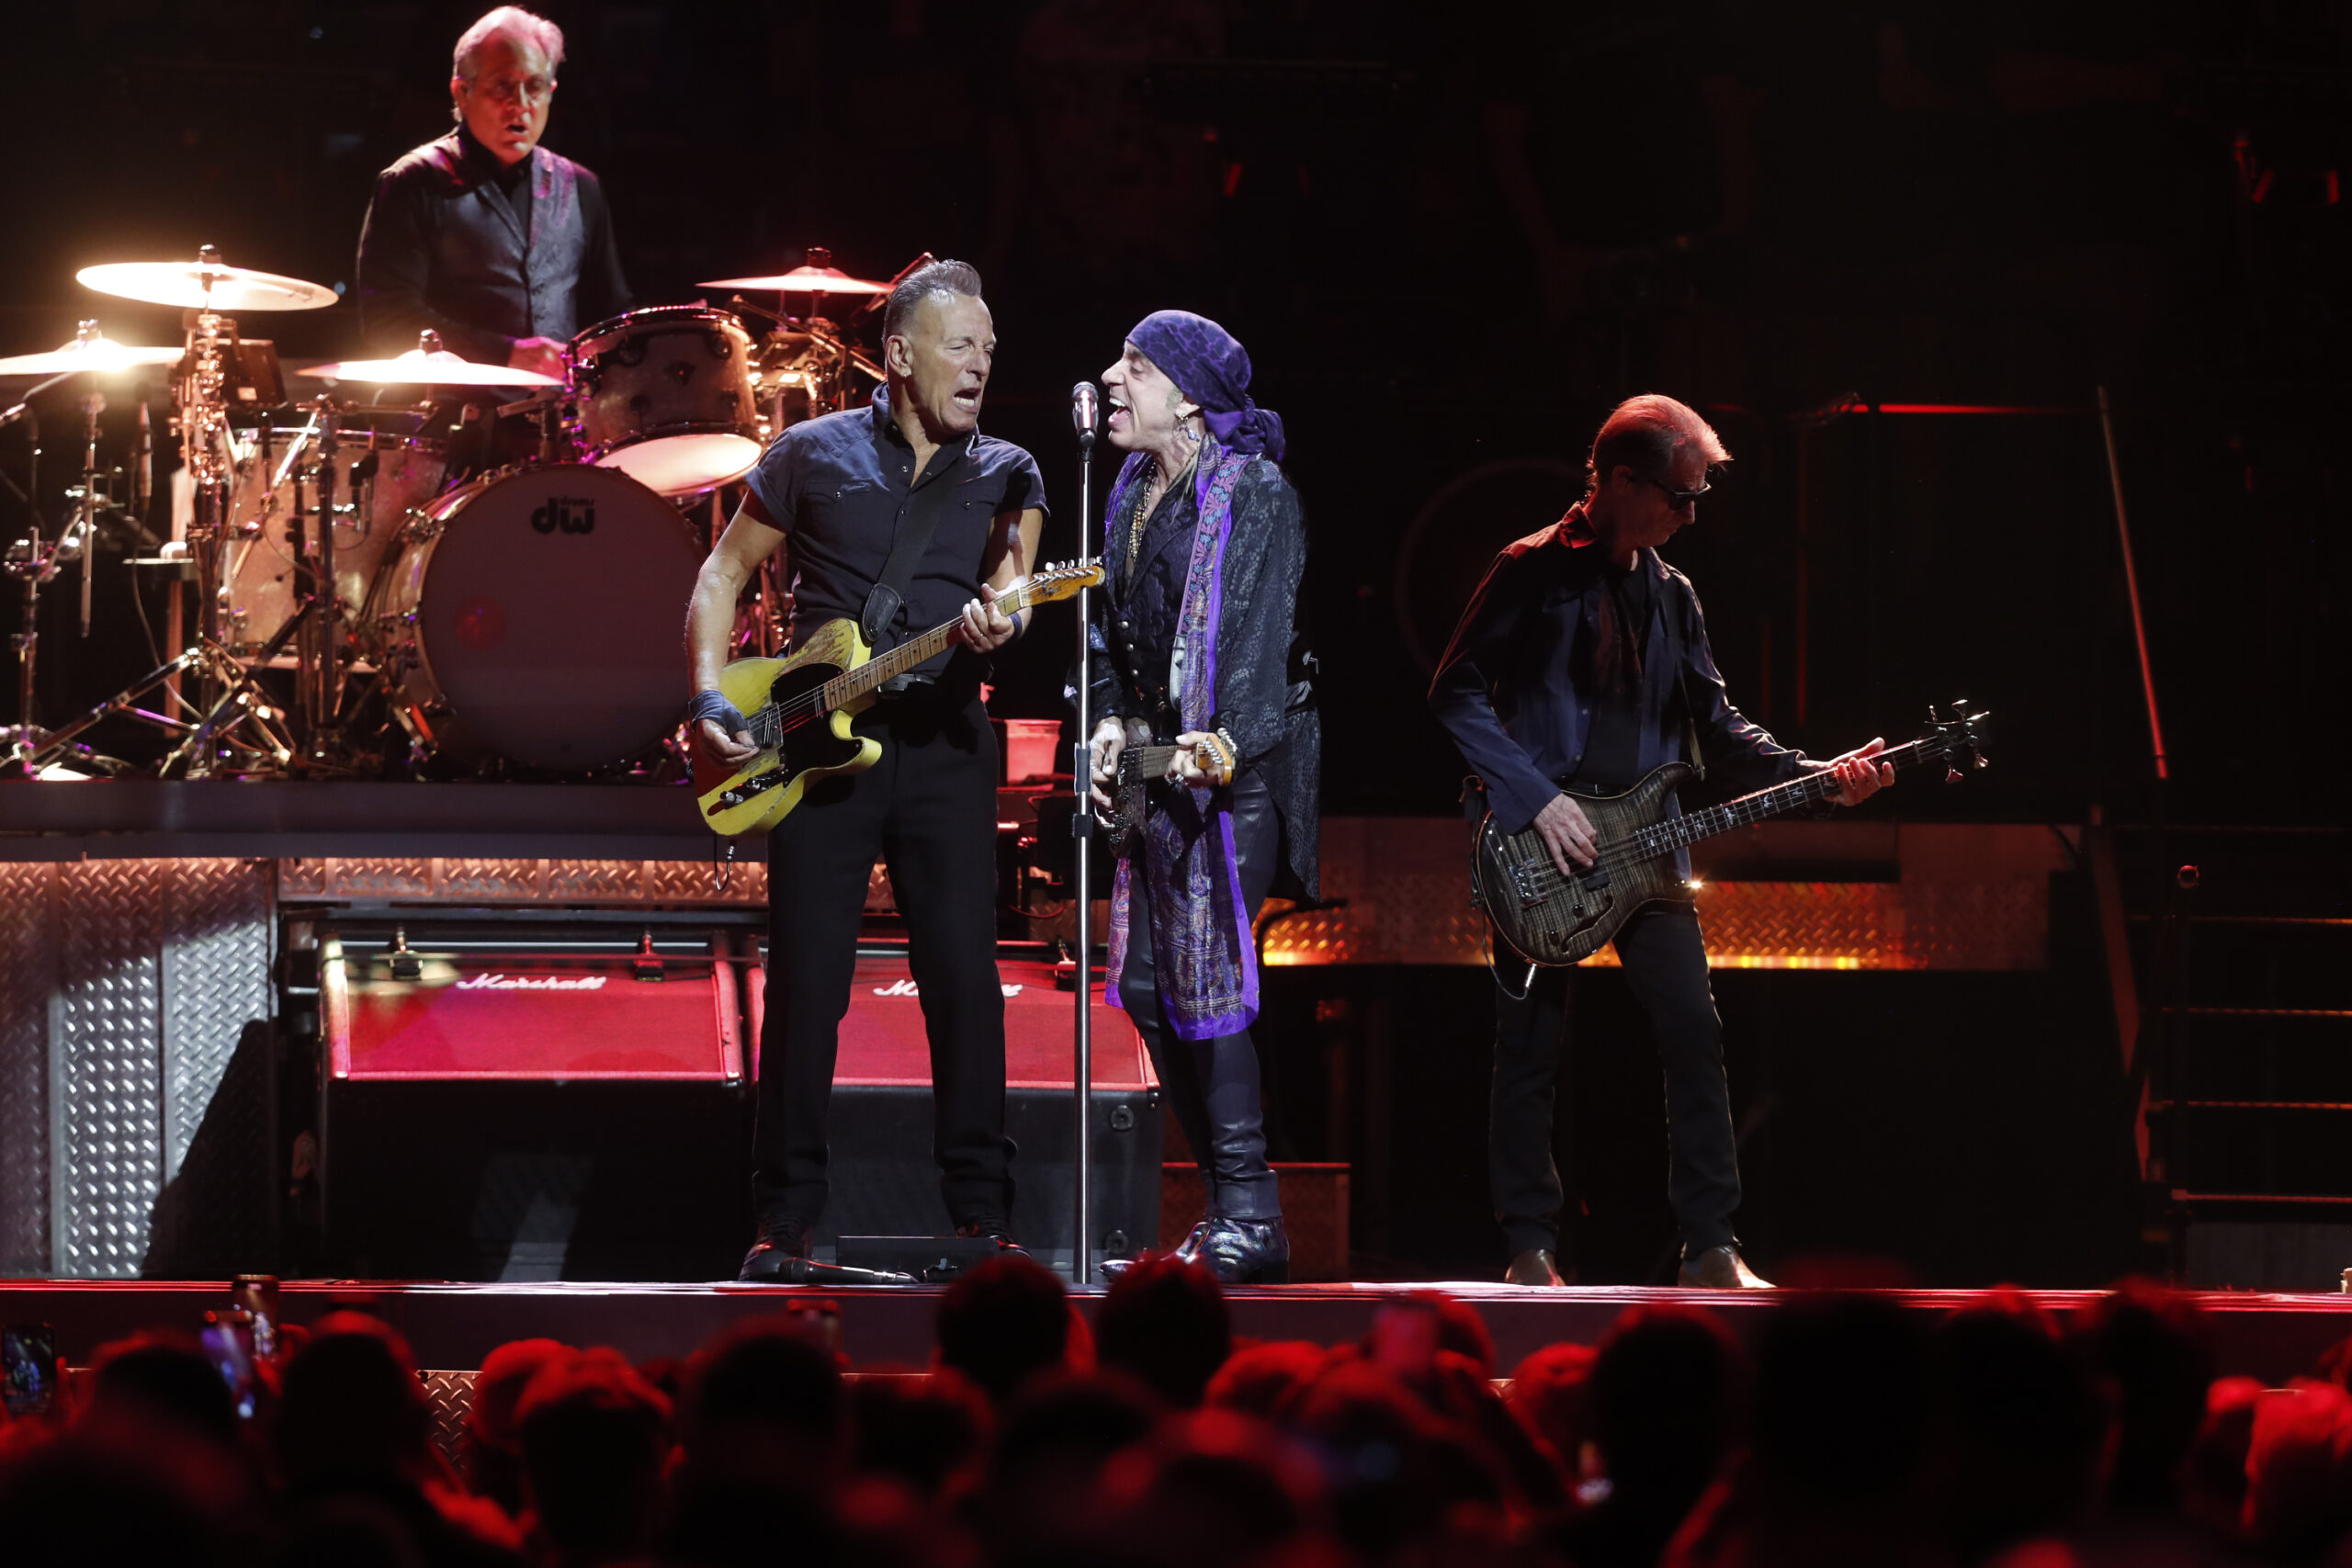 Bruce Springsteen and the E Street Band on Feb. 1, 2023, in Tampa, Fla. (photo: Octavio Jones / Getty Images)